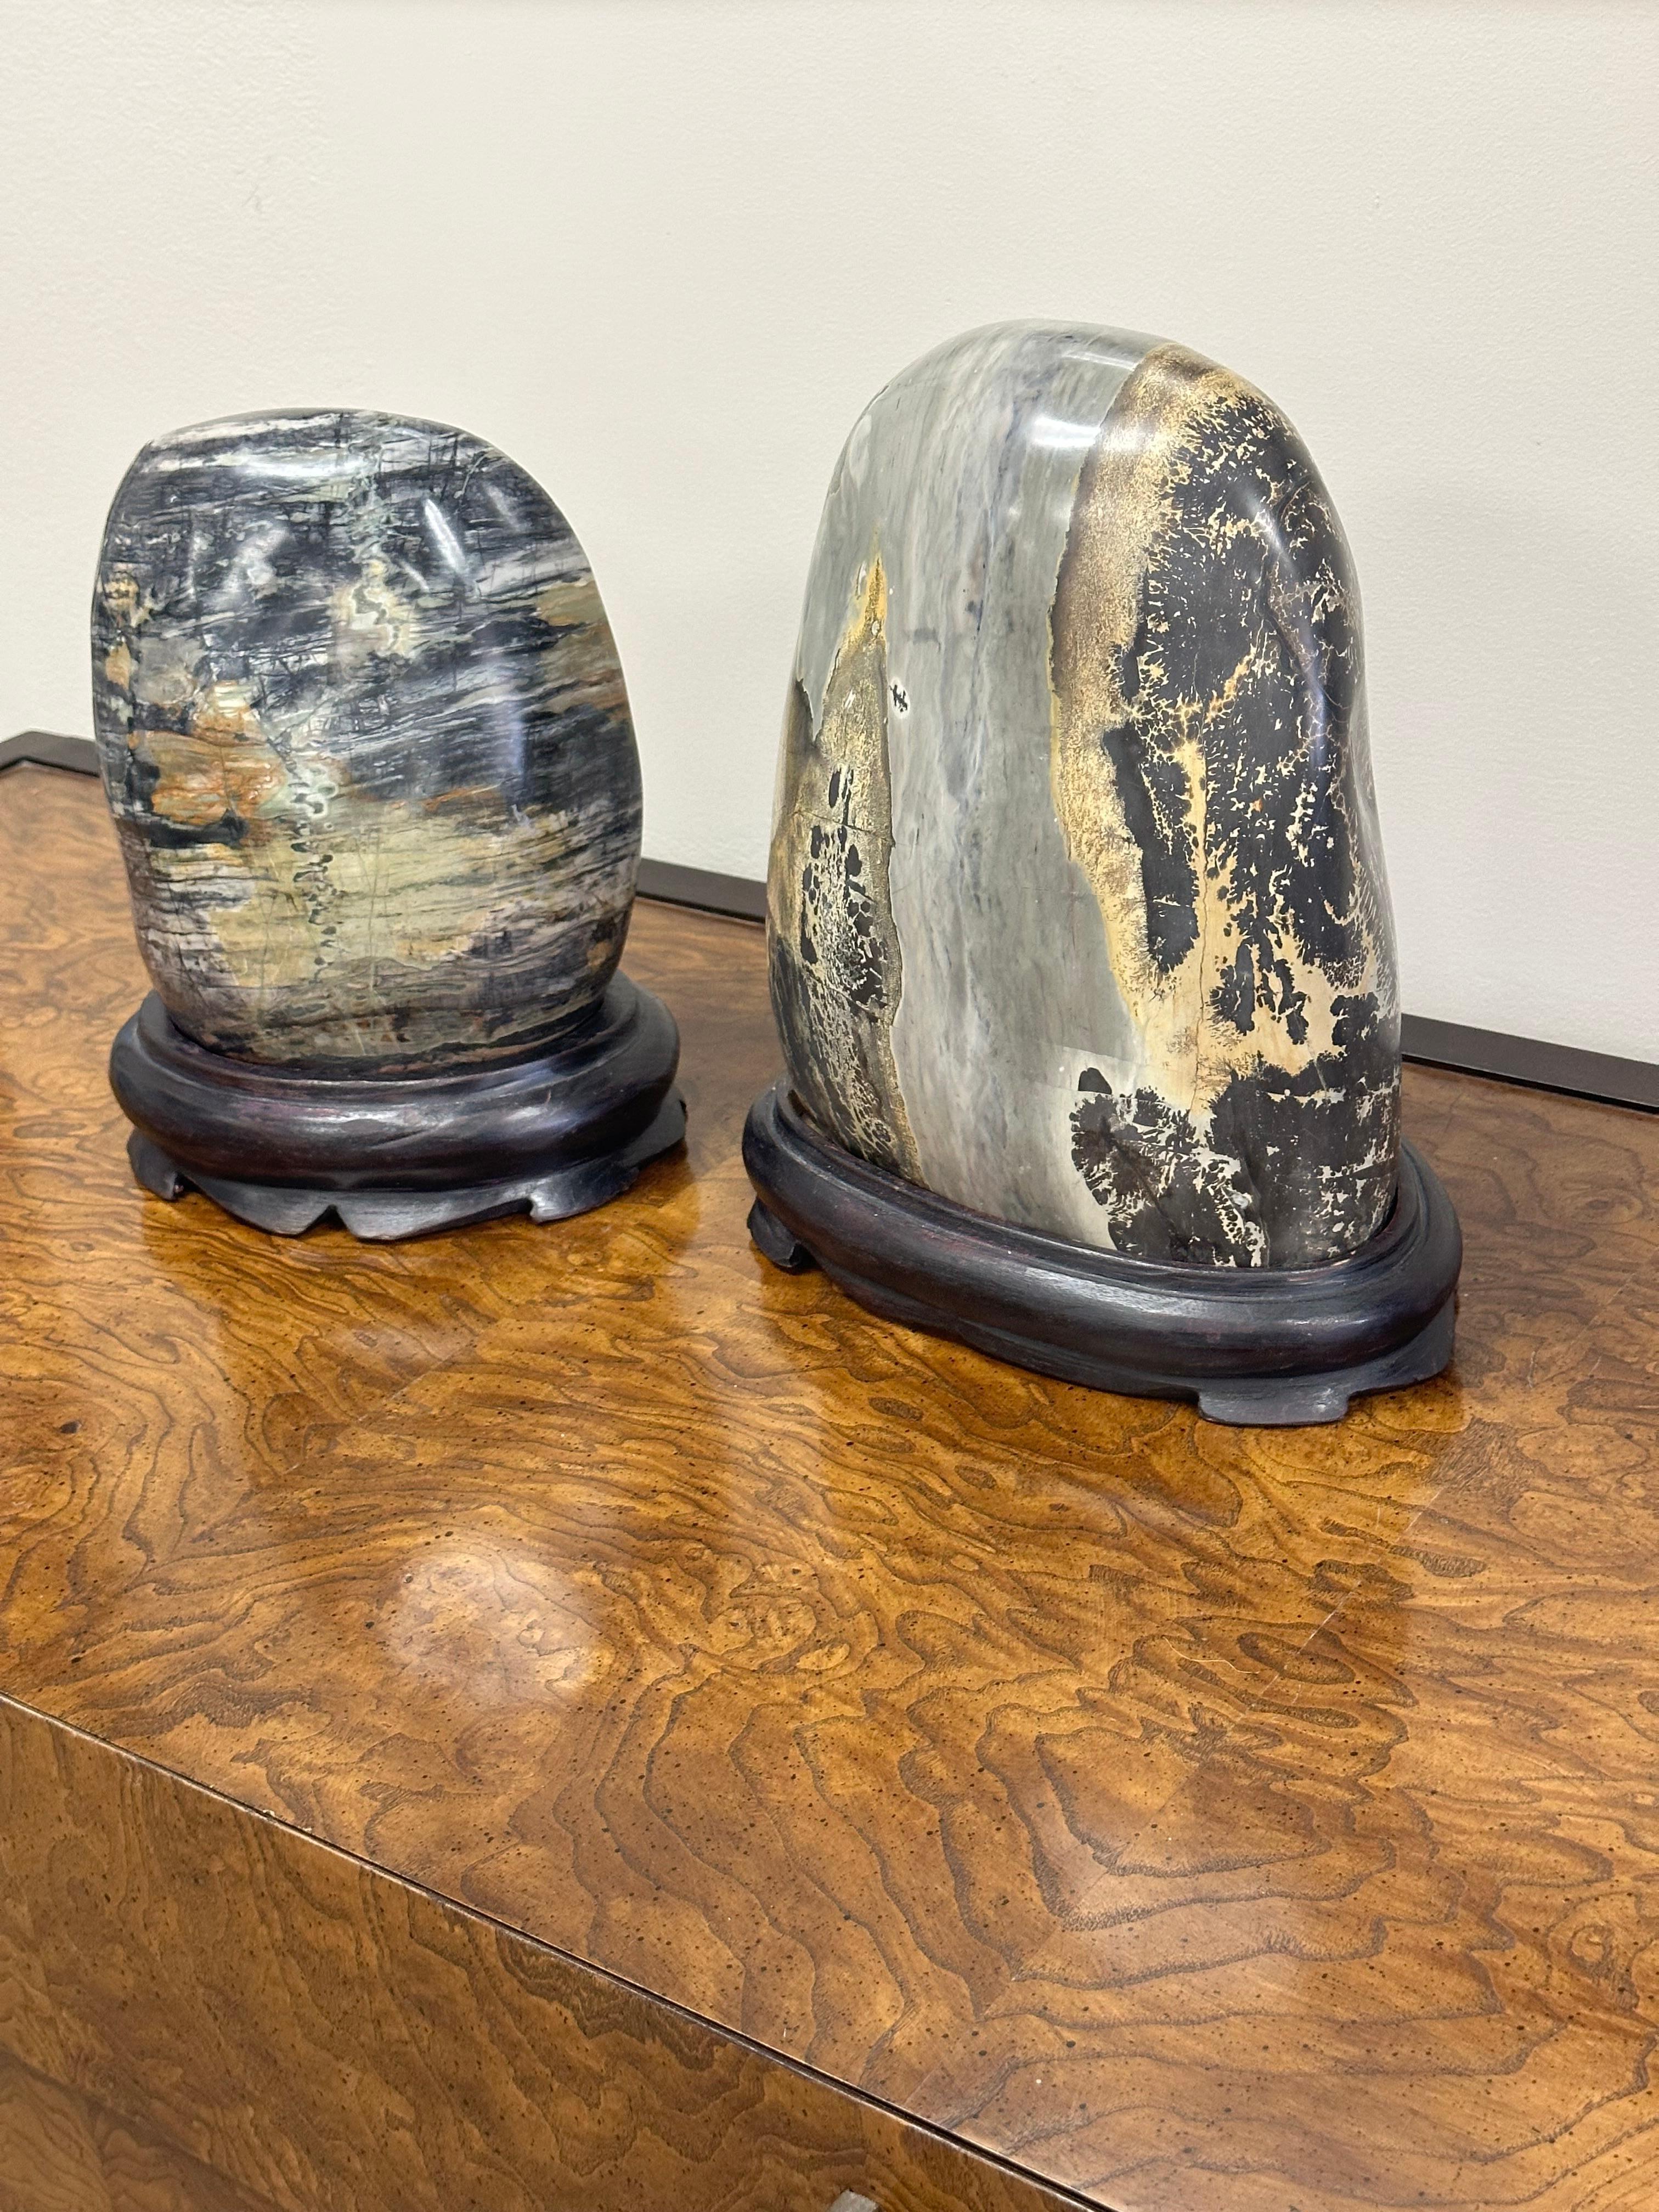 Large Natural Marble Stone Sculptures on Carved Wooden Stands, a pair

A set of two large, polished natural marble stones, displayed on custom carved wooden stands. These are sculptural, organic pieces, with varying colors and movement within the